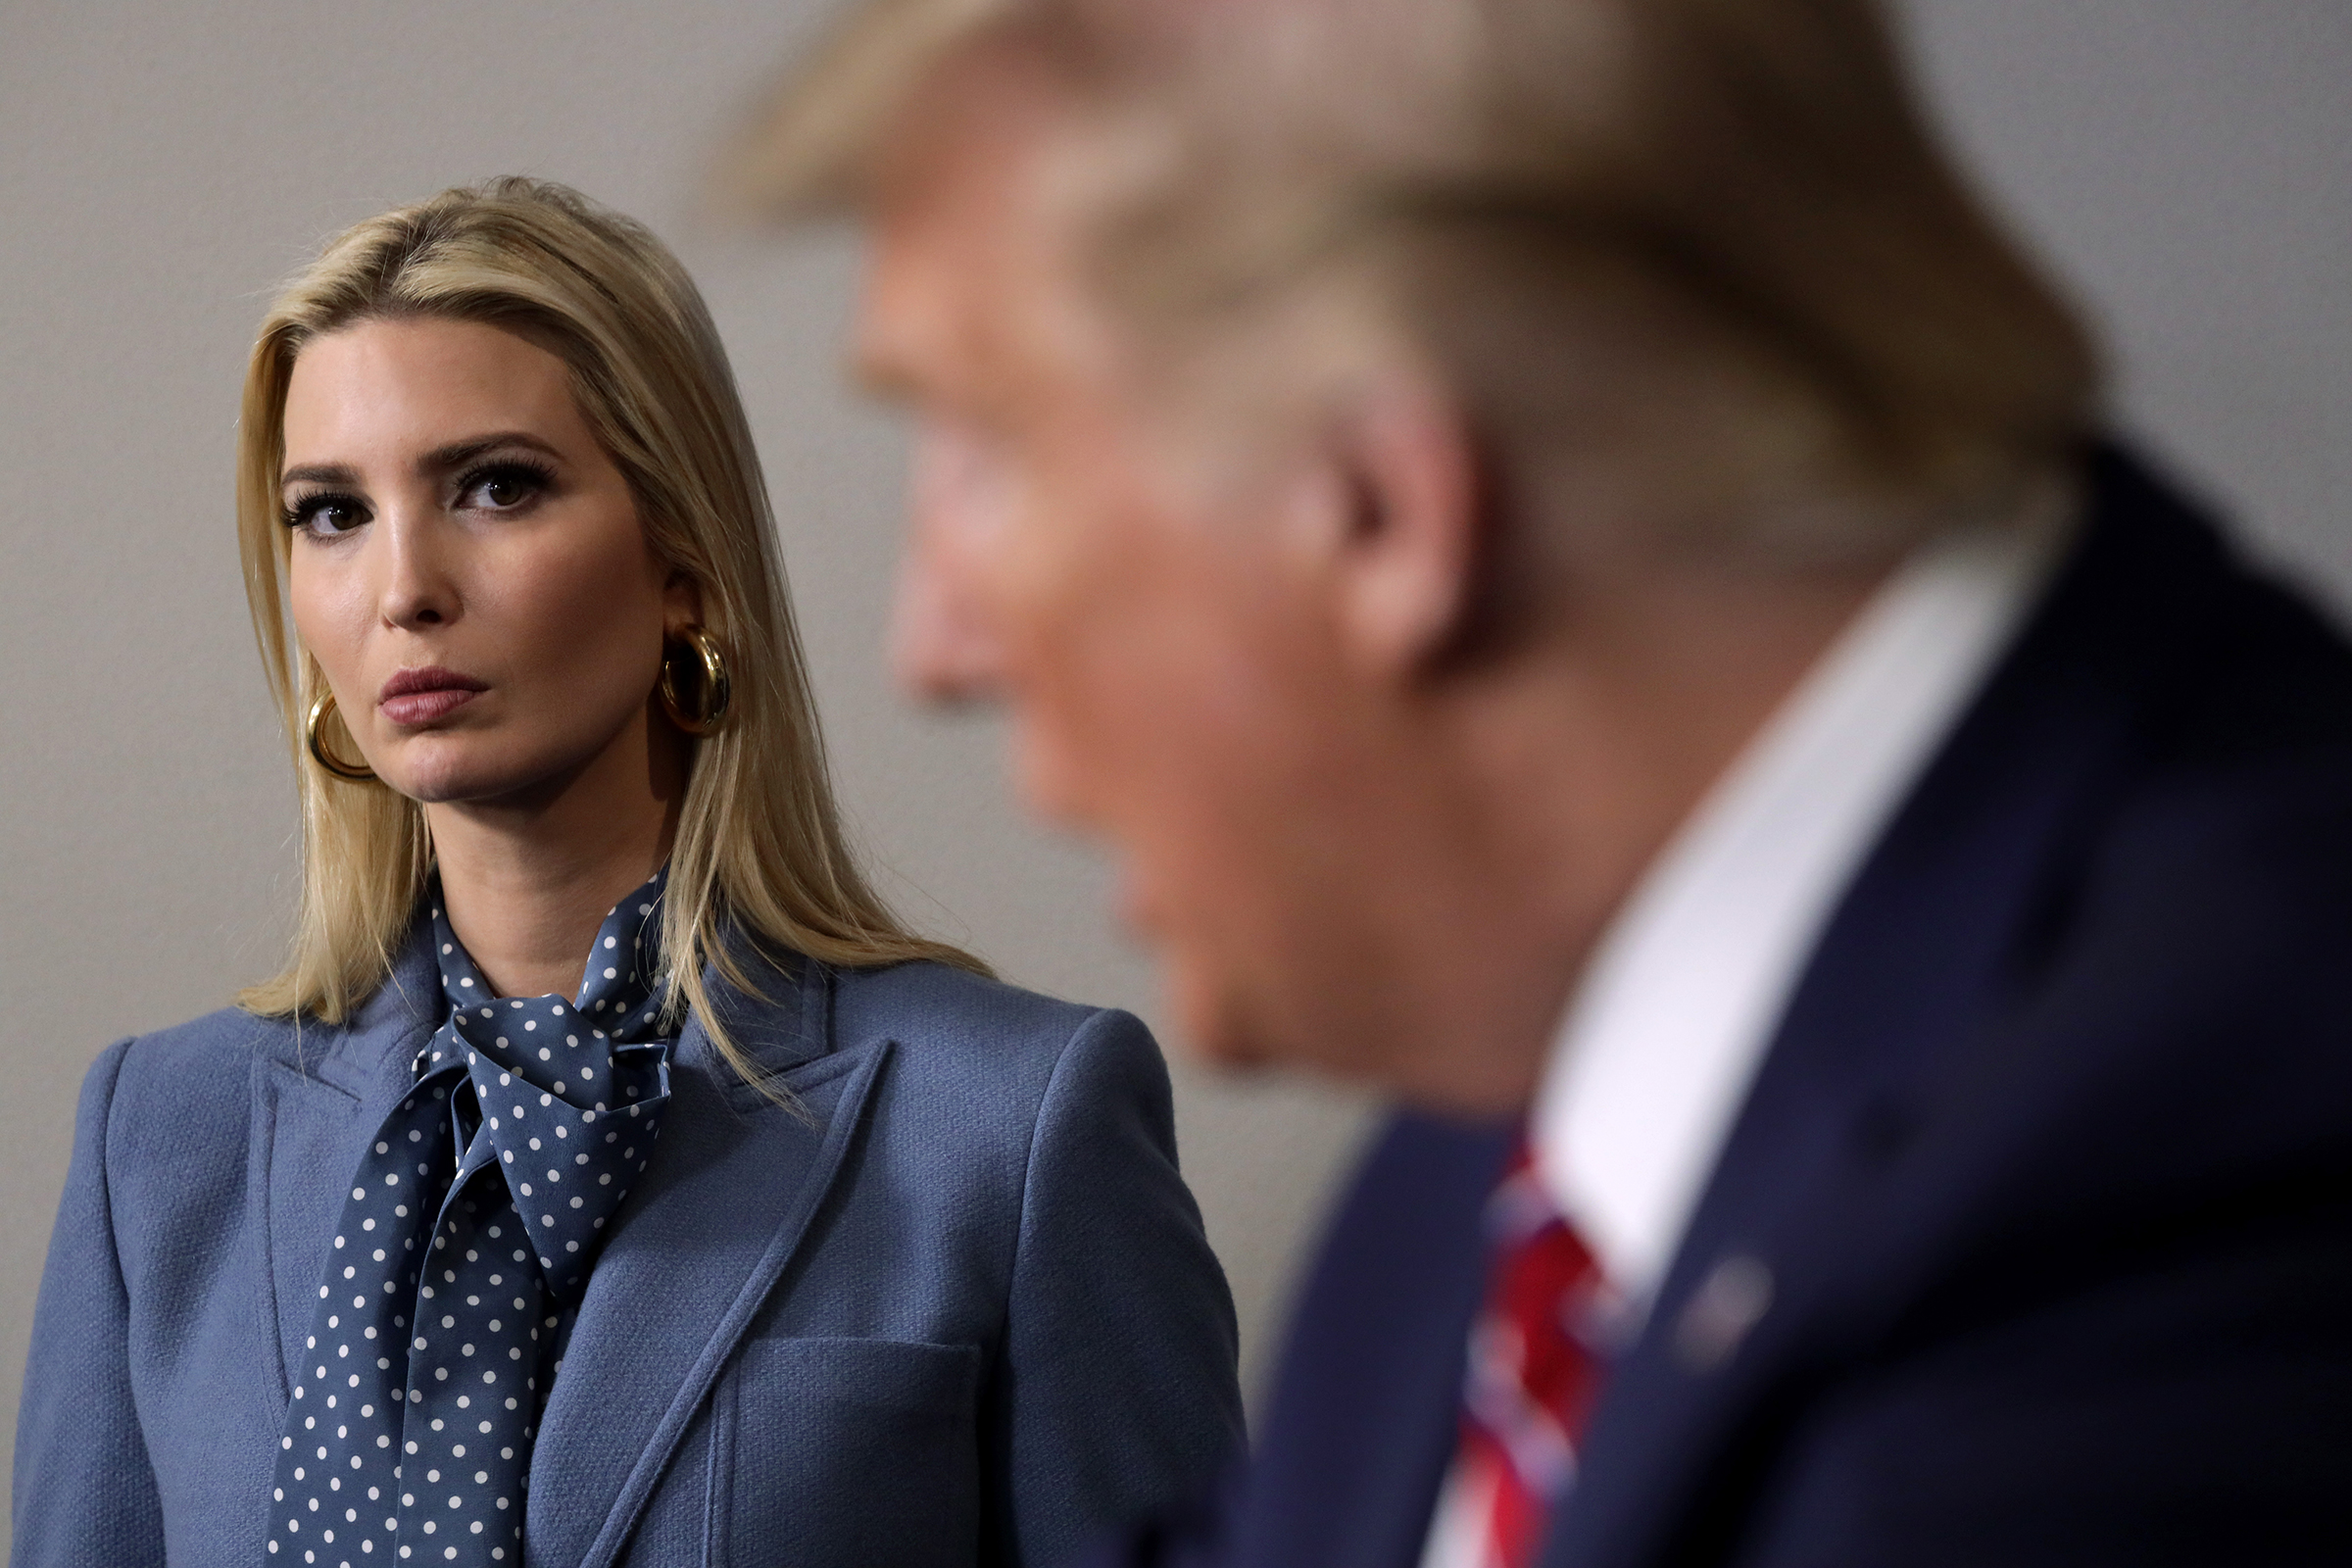 Ivanka Trump says she is “pained” for her father and country in Instagram post following indictment